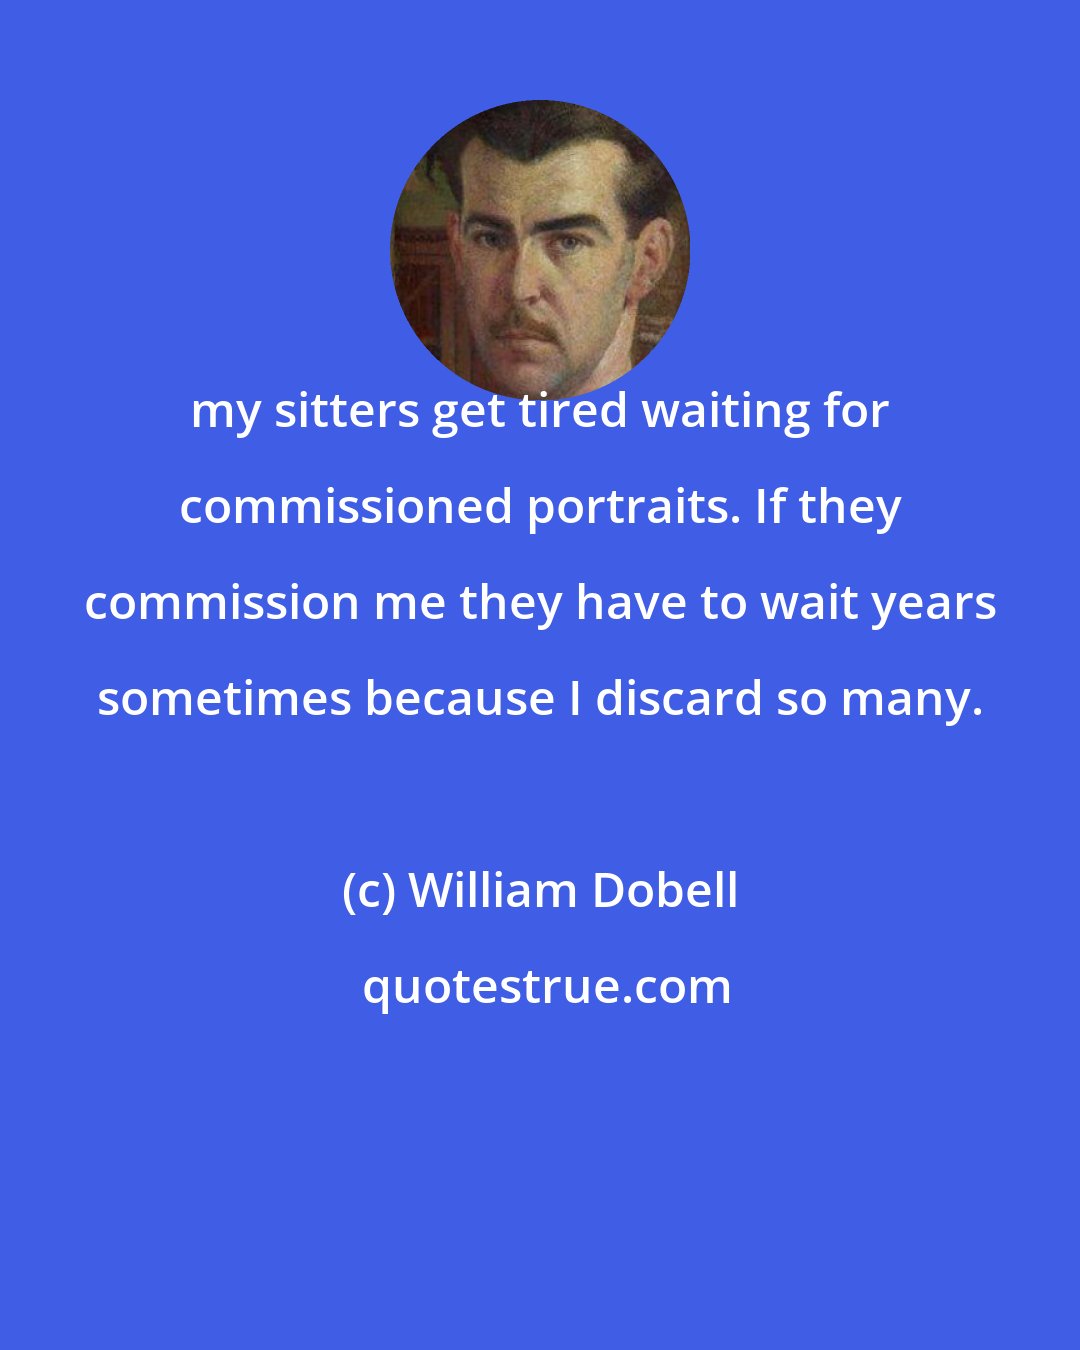 William Dobell: my sitters get tired waiting for commissioned portraits. If they commission me they have to wait years sometimes because I discard so many.